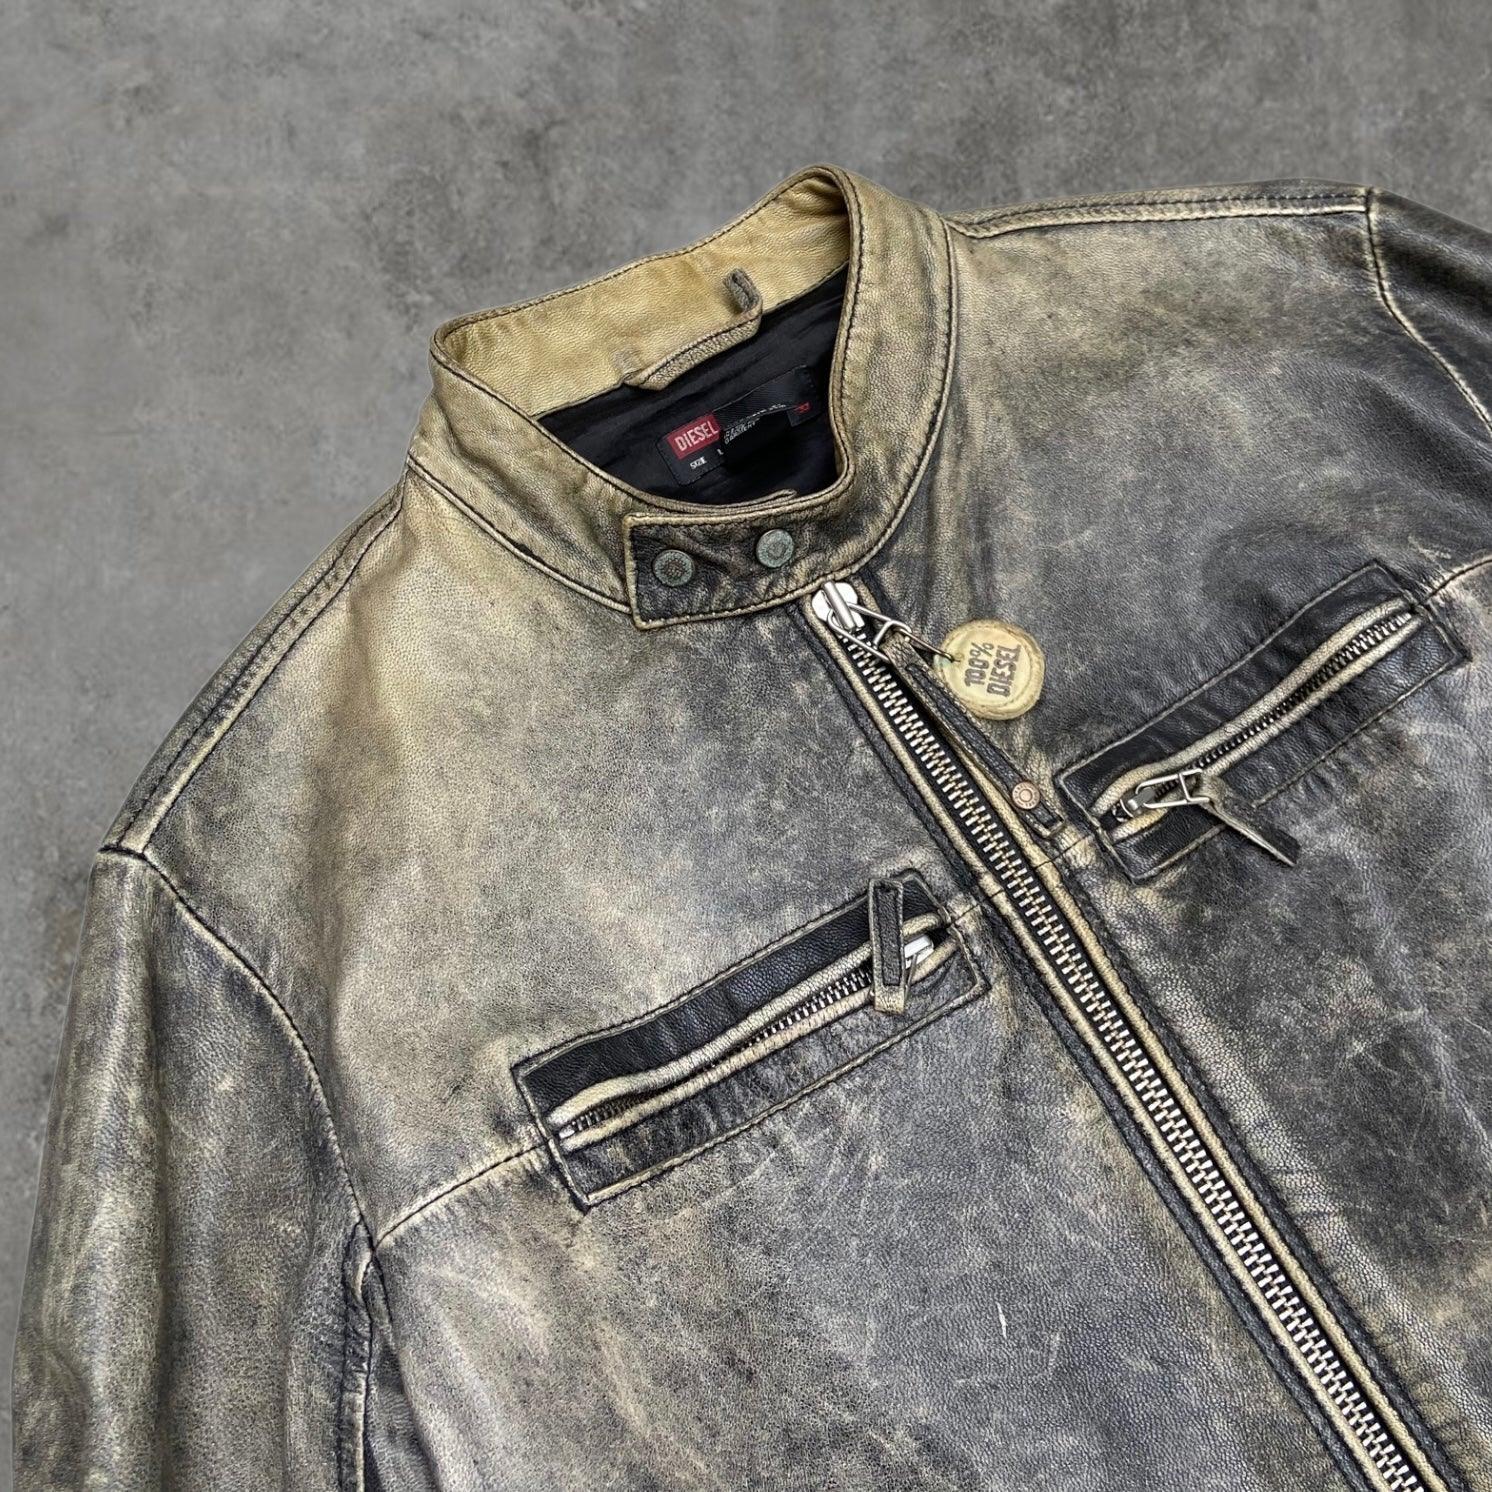 DIESEL DISTRESSED 90'S LEATHER JACKET - L - Known Source